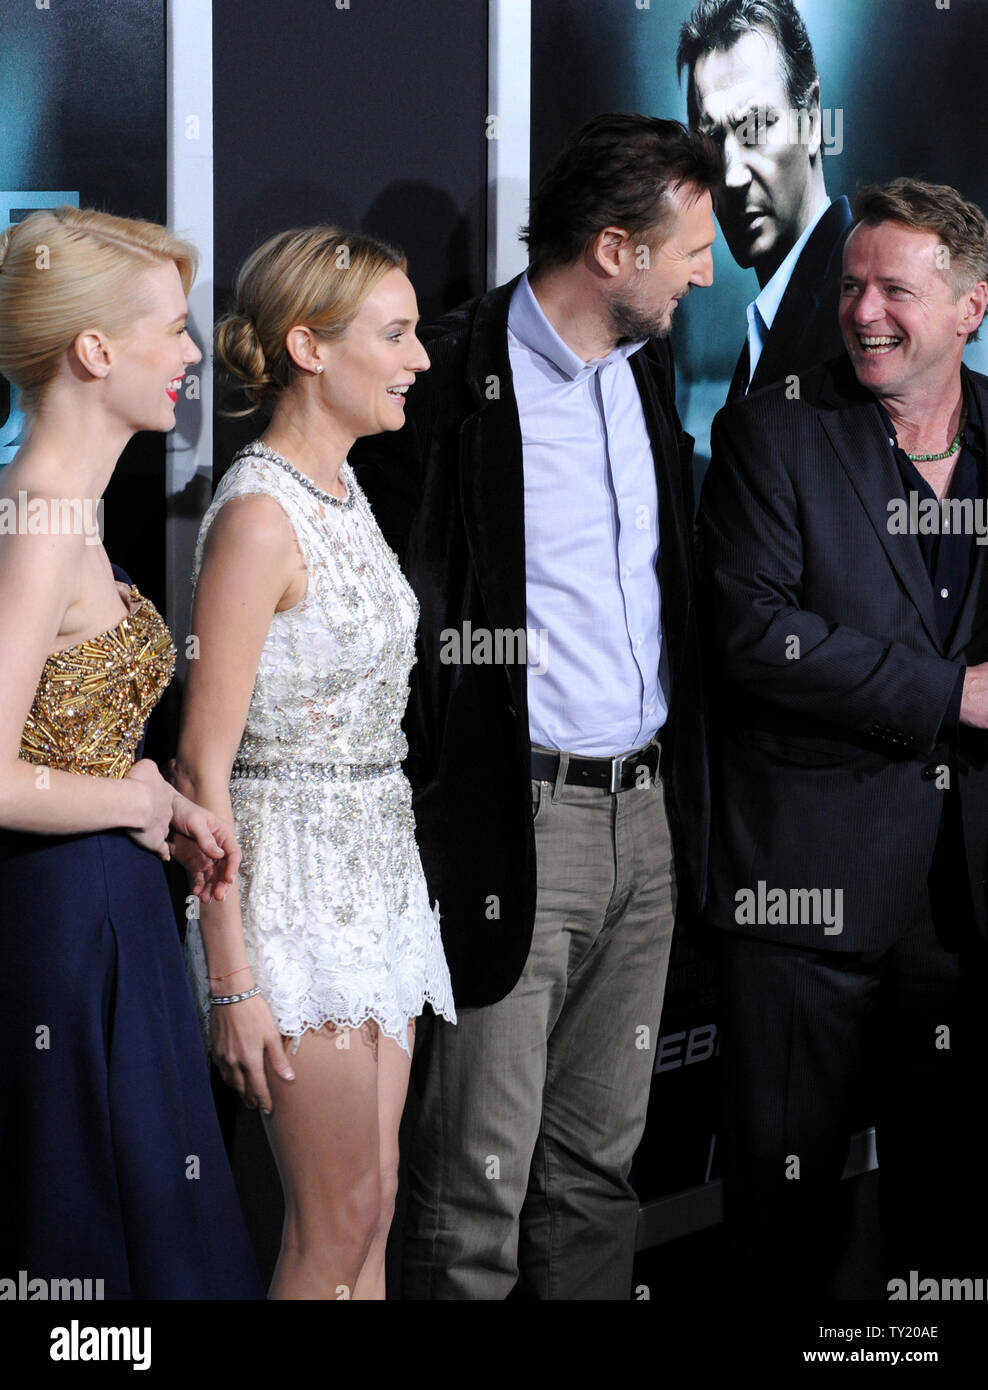 January Jones, Liam Neeson, Diane Kruger and Aidan Quinn (L-R), cast members in the motion picture thriller 'Unknown', share a laugh on the red carpet during the premiere of the film at The Mann Village Theatre in Los Angeles on February 16, 2011.  UPI/Jim Ruymen Stock Photo